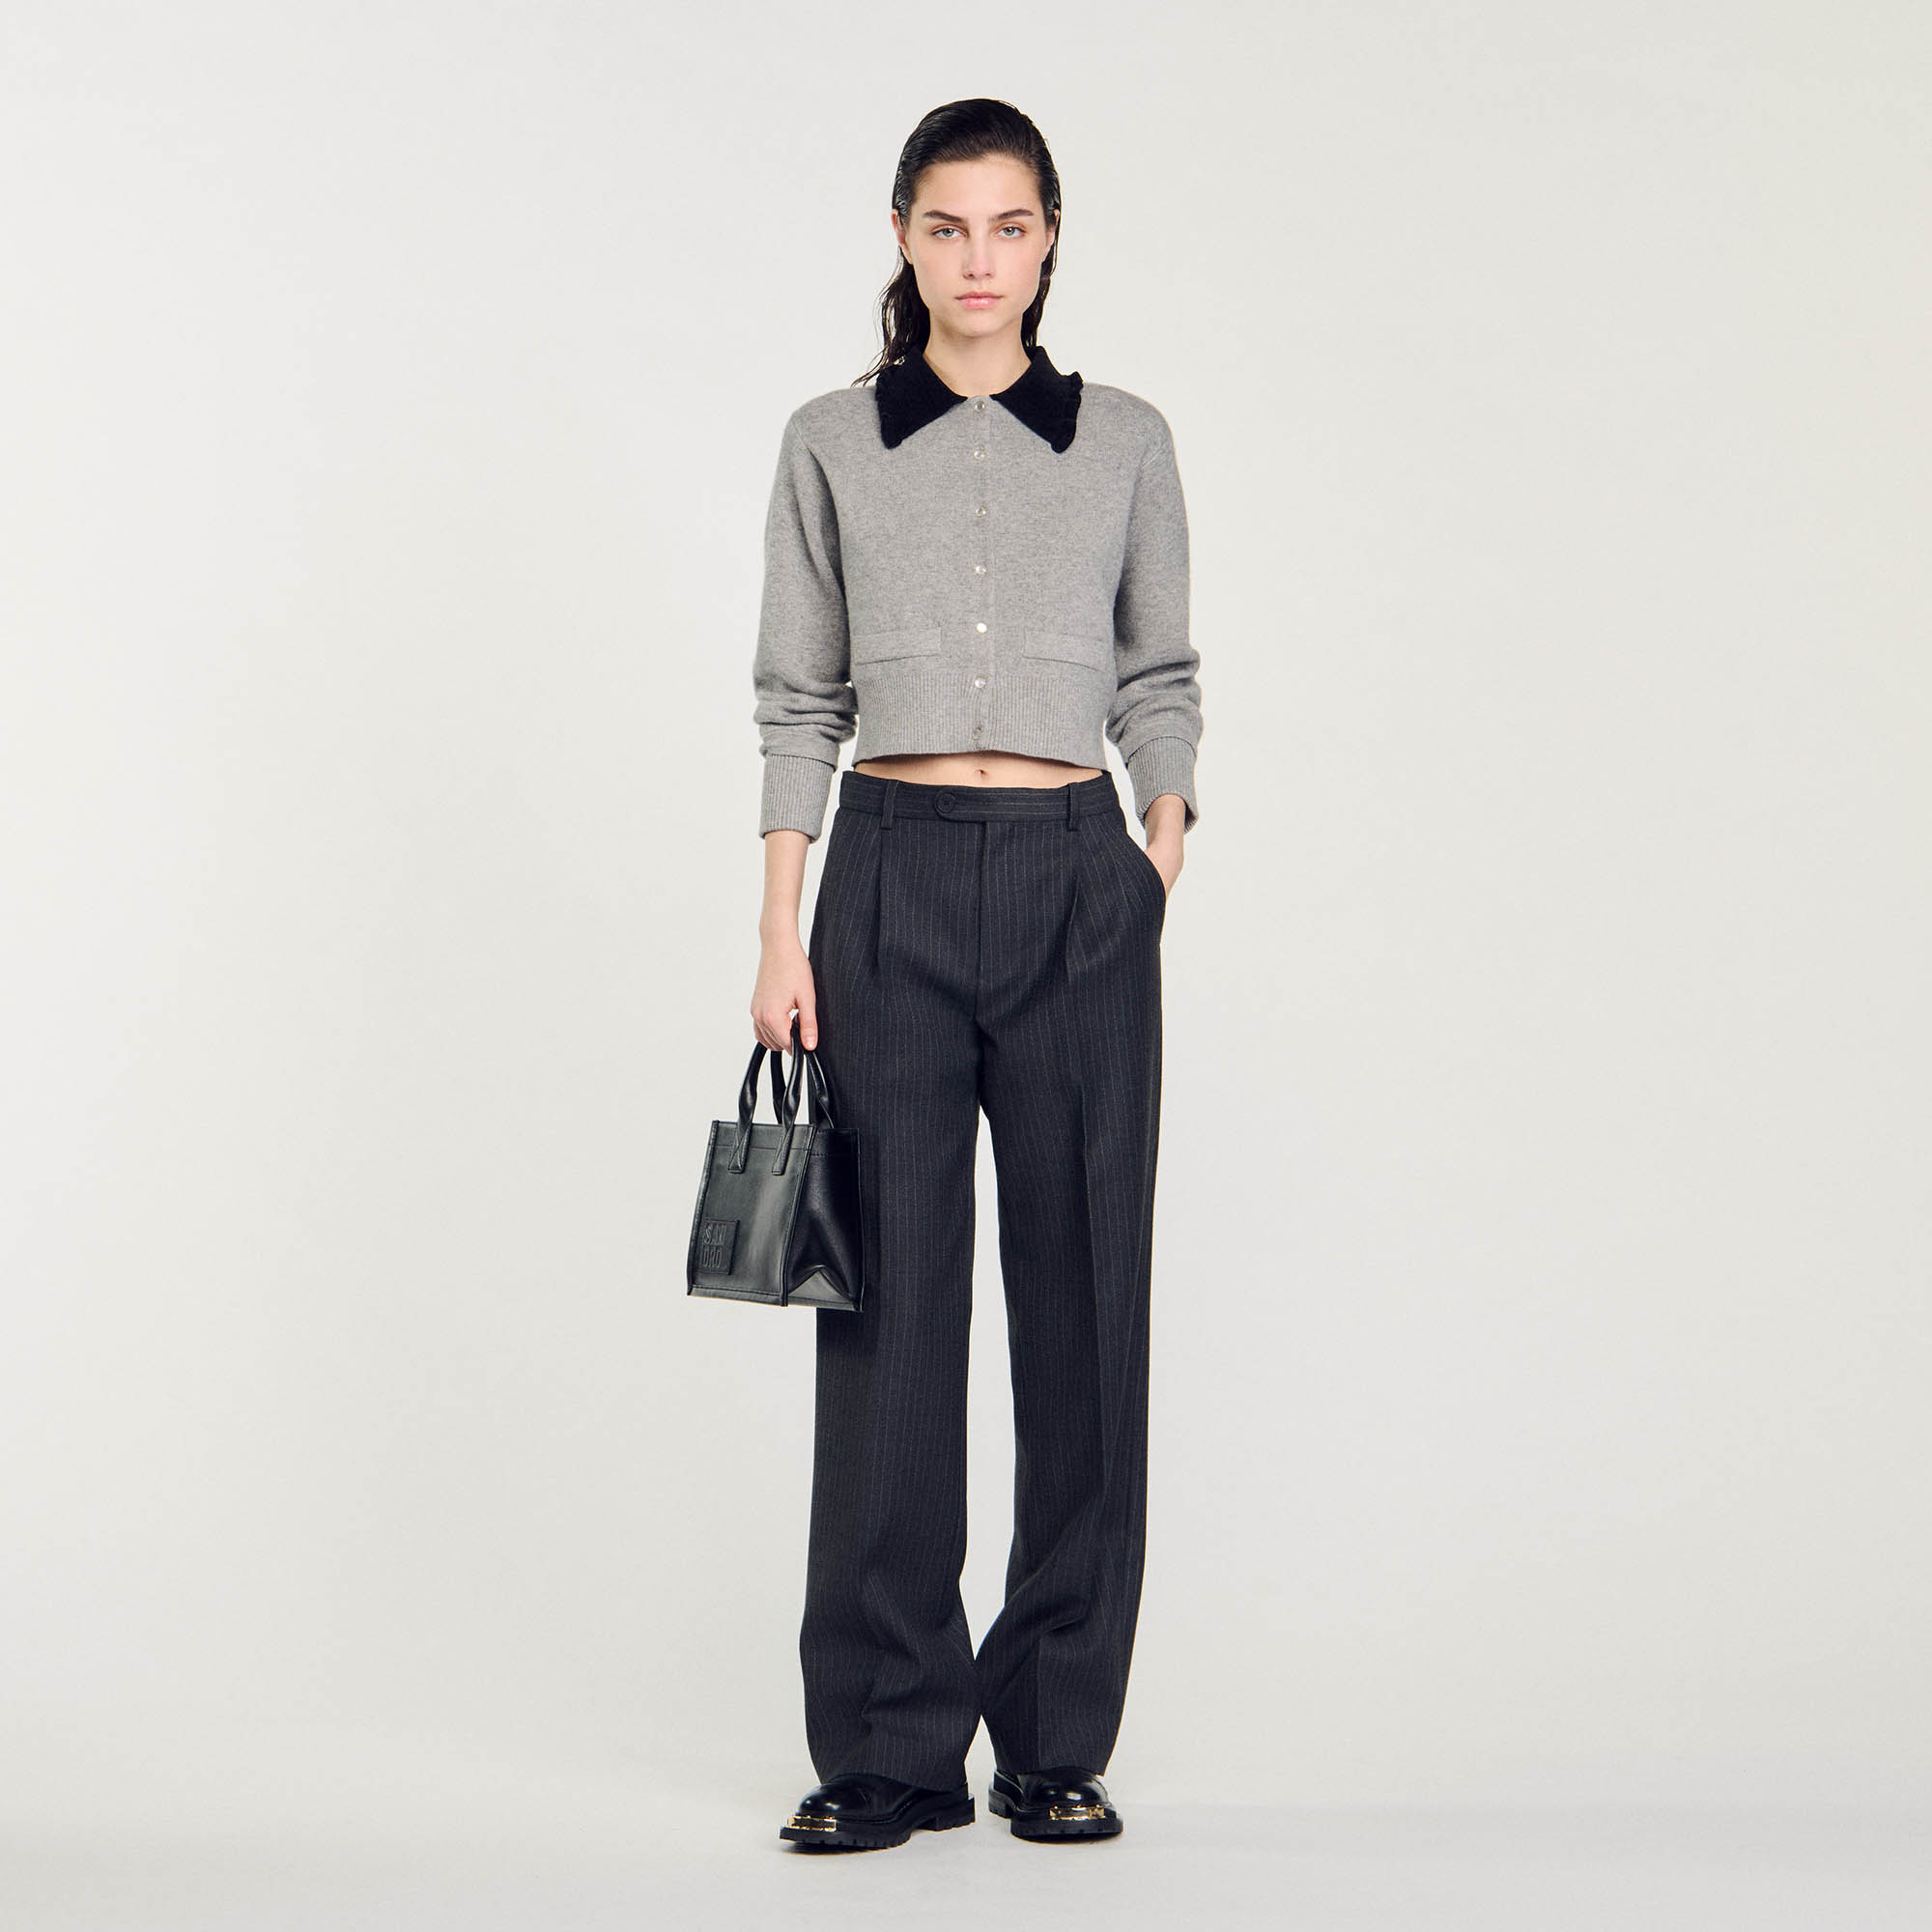 Sandro viscose Cropped shirt-style coatigan with a contrasting velvet collar, long sleeves, and a button fastening